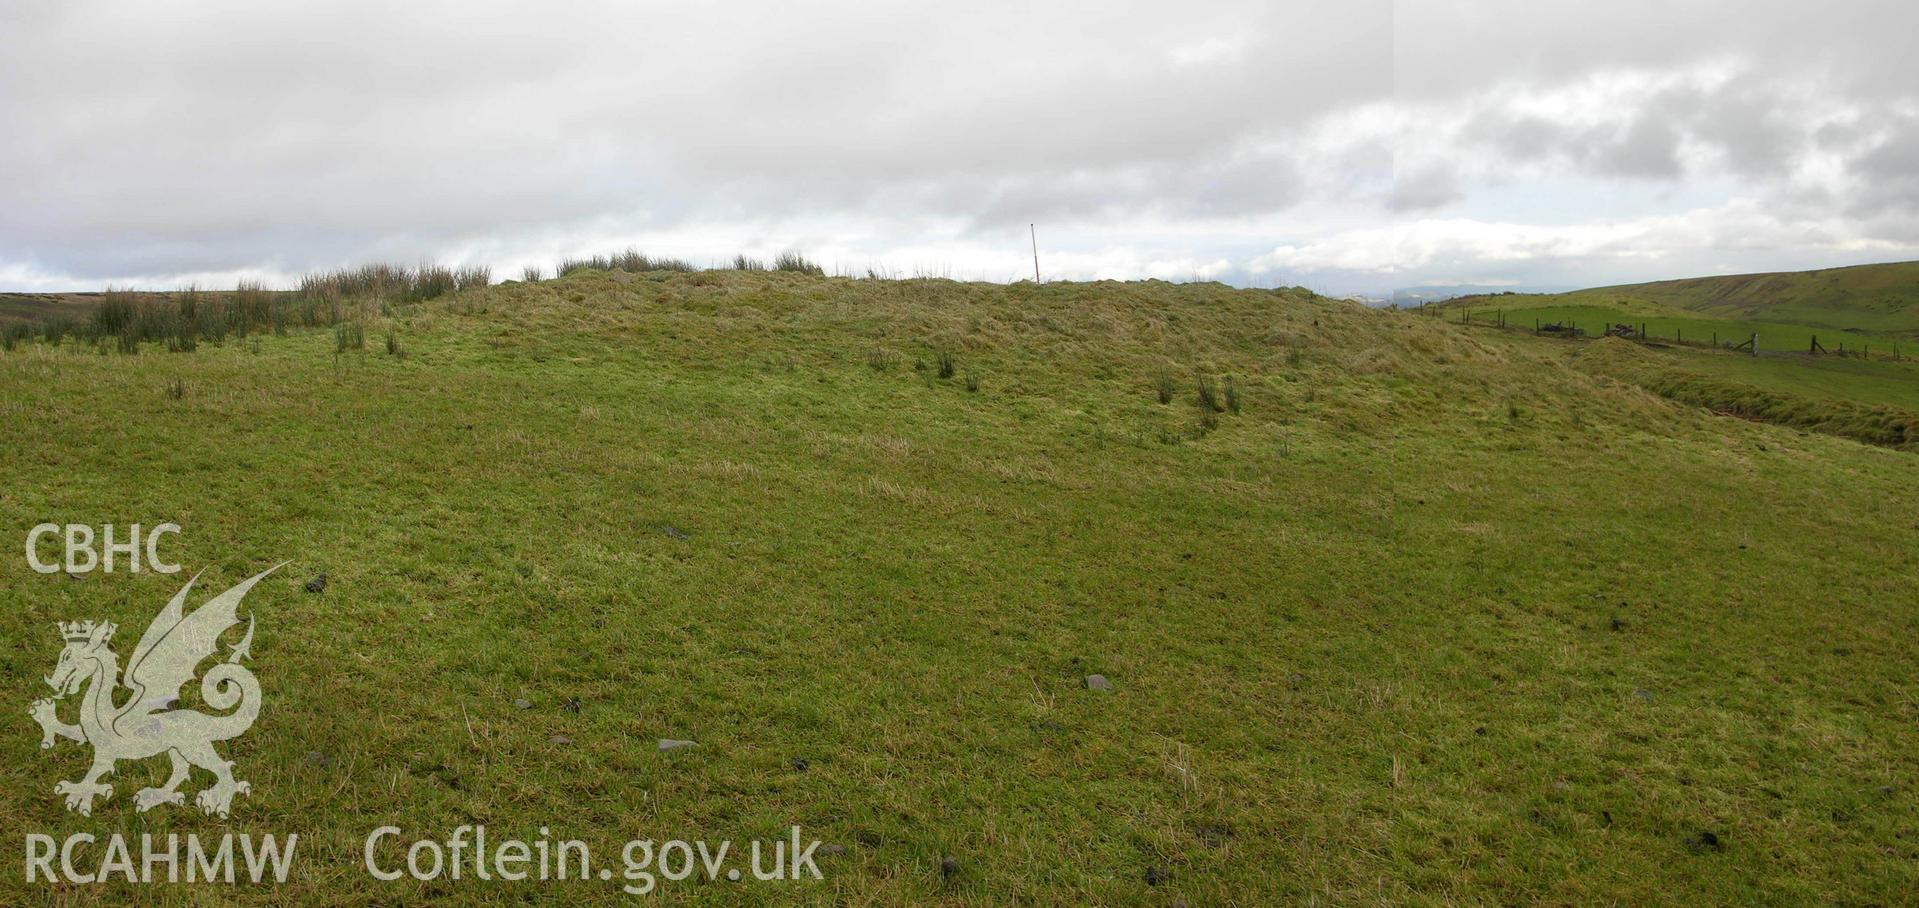 Colour digital photograph showing view of seemingly unrecorded 'cairn' nr Carneddau - part of archaeological desk based assessment for Esgair Cwmowen, Carno (CAP Report 549).